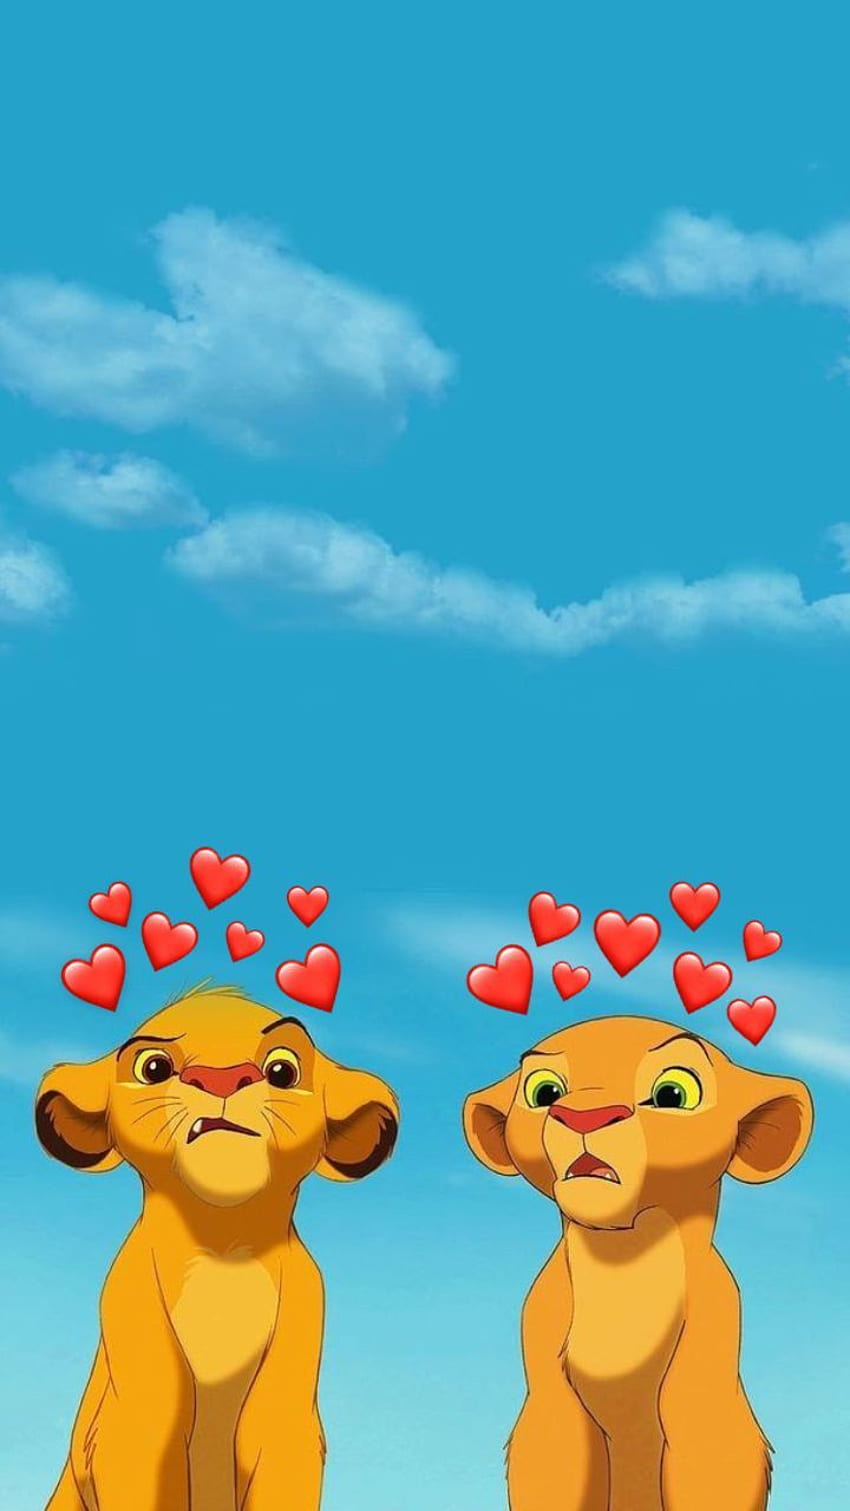 Simba The Lion King  IPhone Wallpapers  iPhone Wallpapers